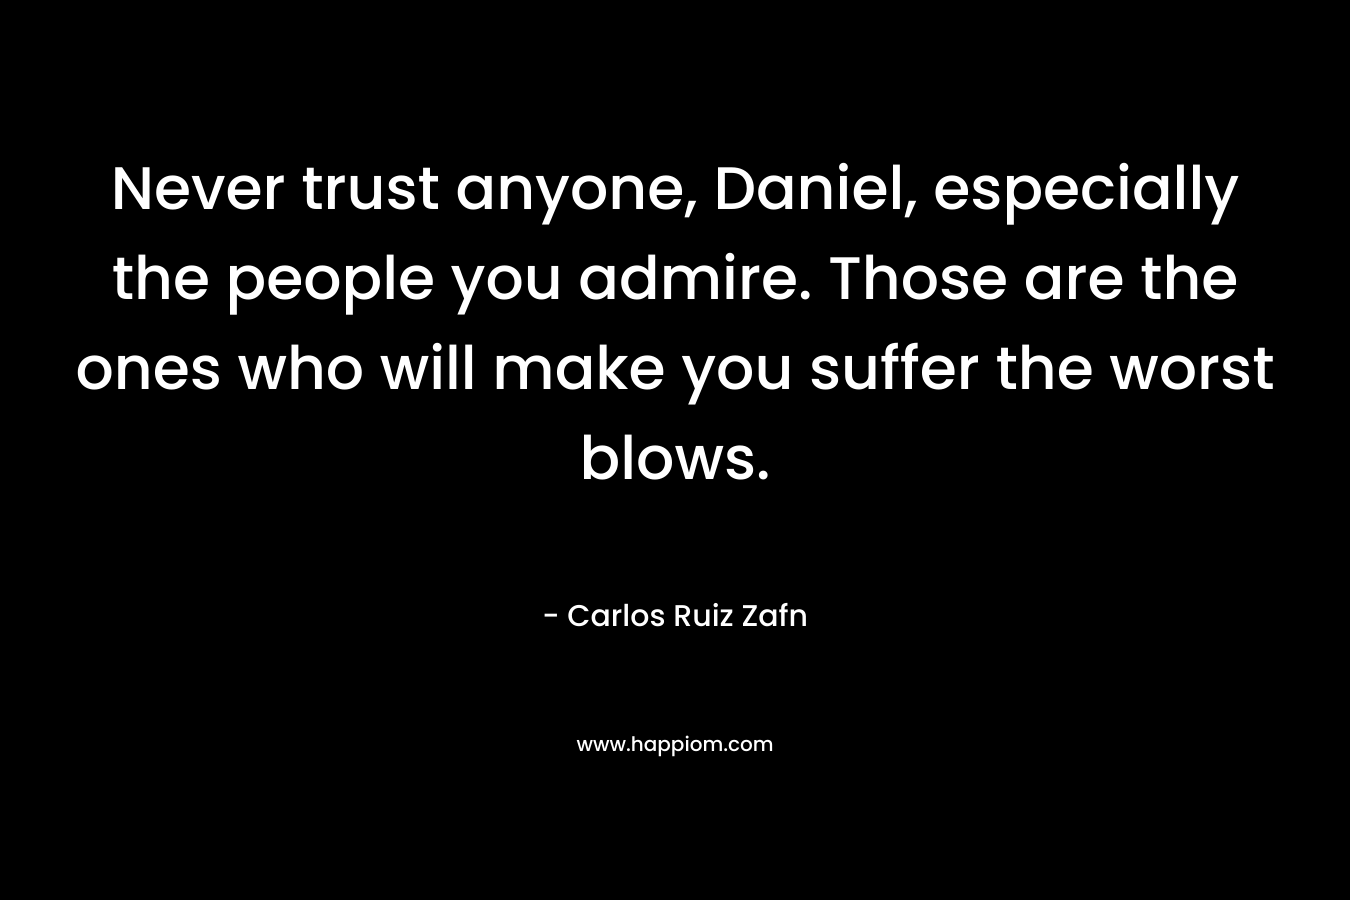 Never trust anyone, Daniel, especially the people you admire. Those are the ones who will make you suffer the worst blows.